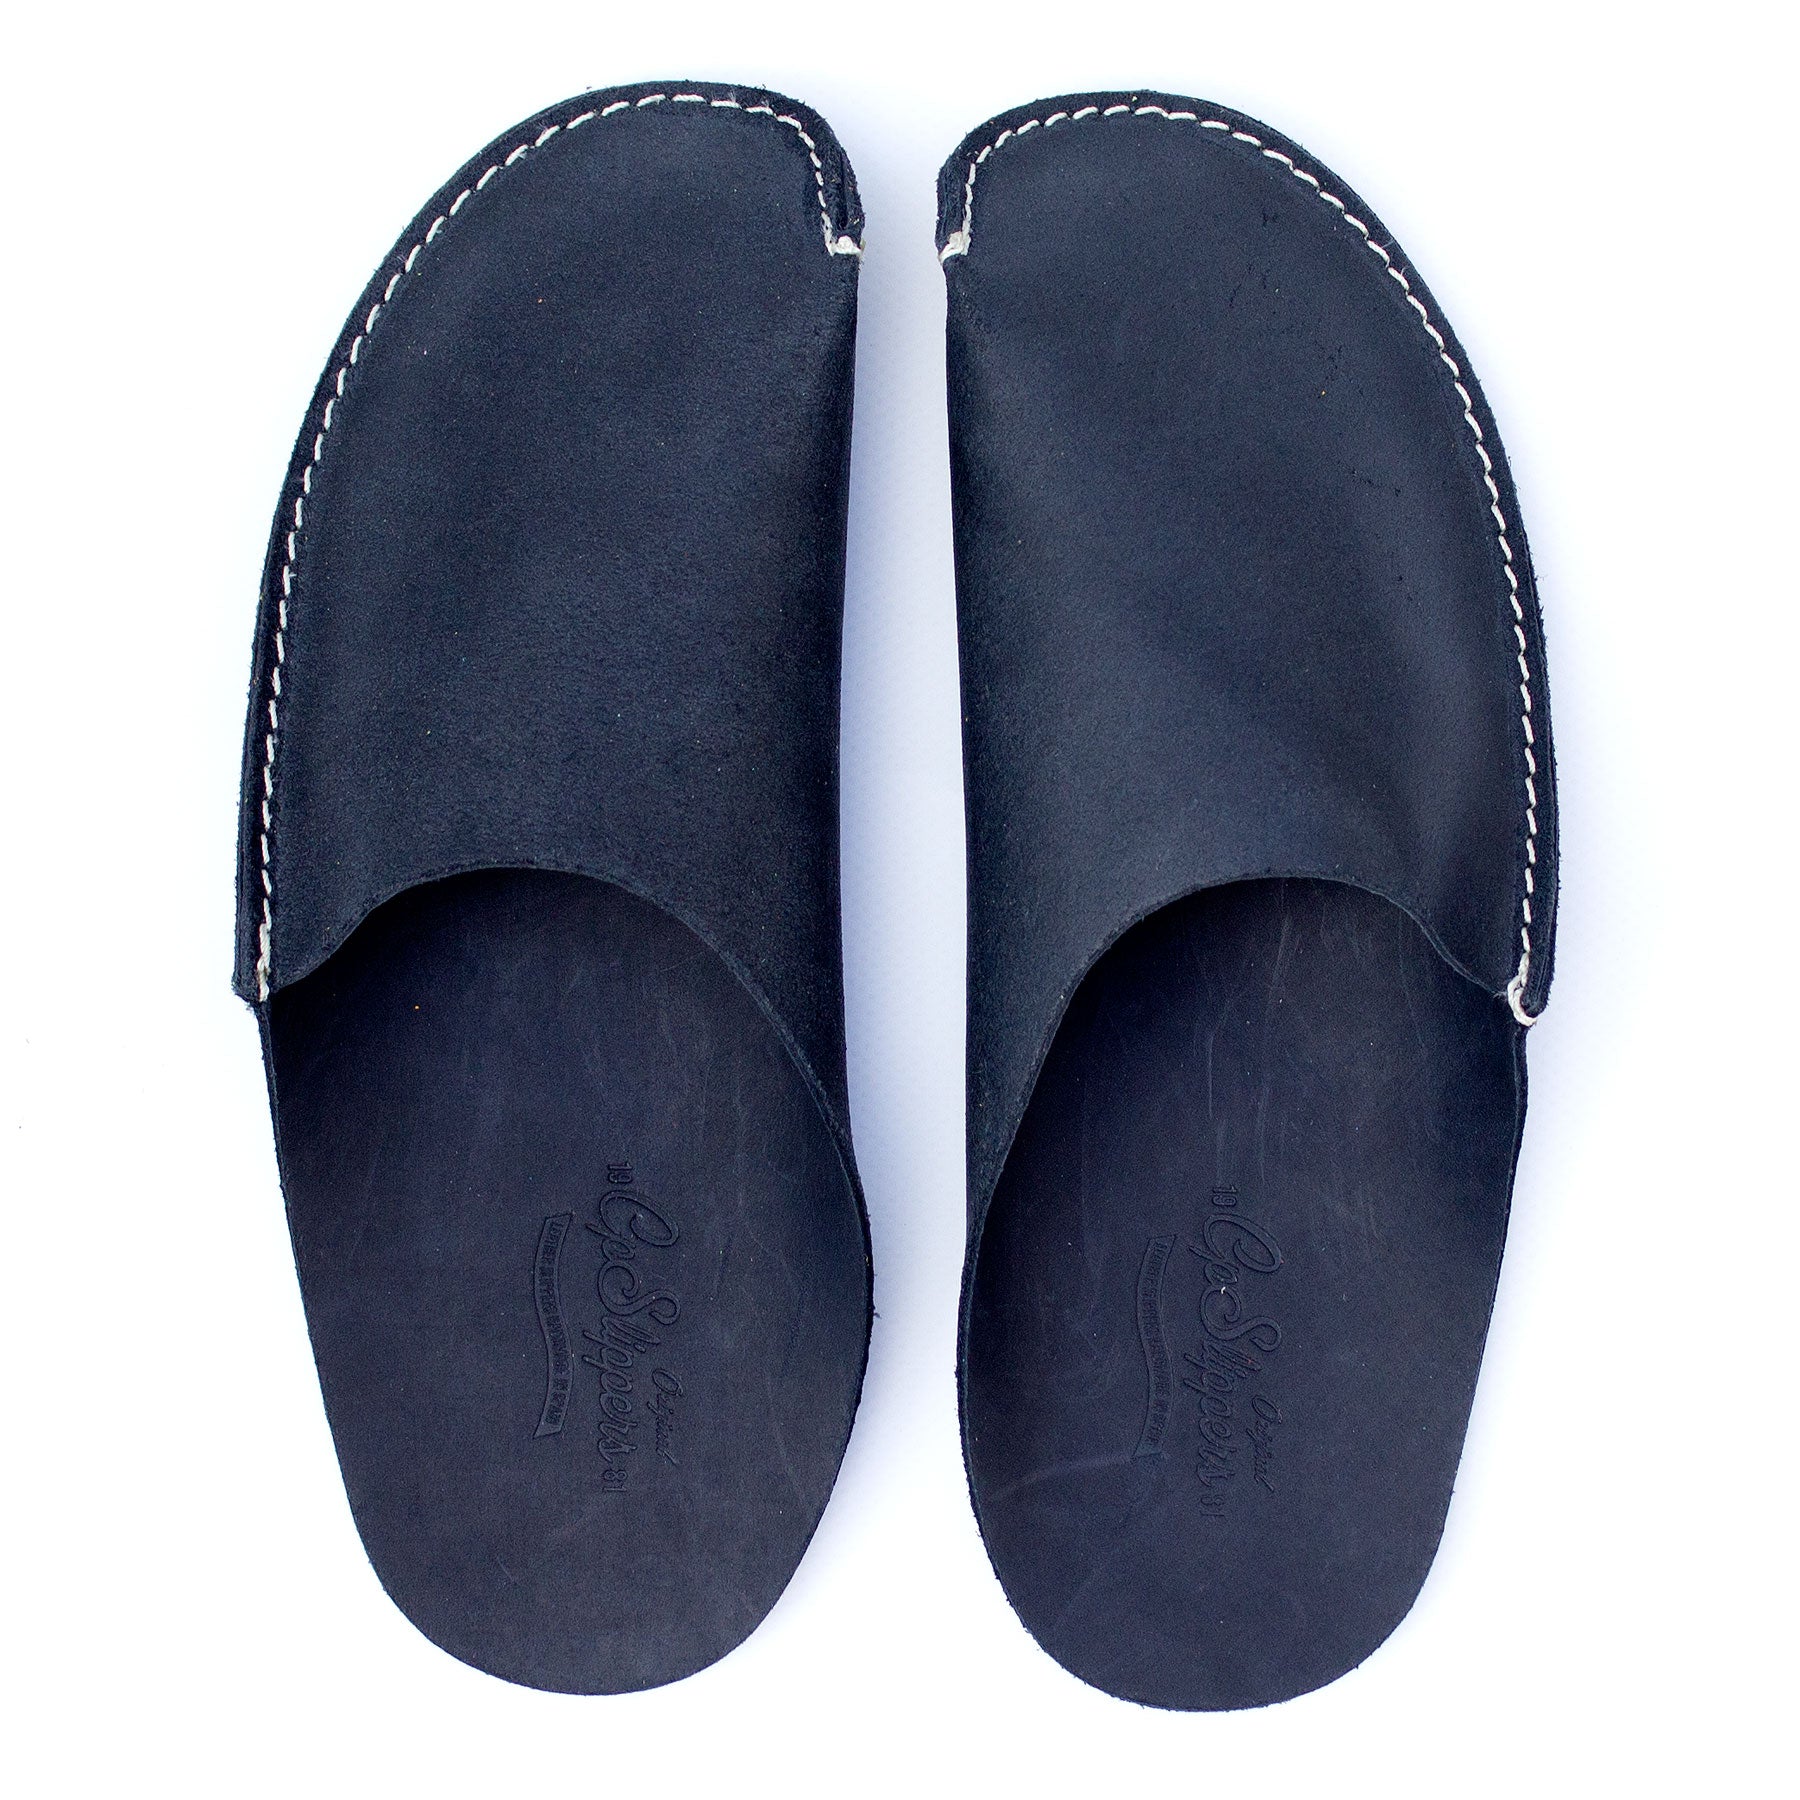 Black CP Slippers Minimalist for man and woman